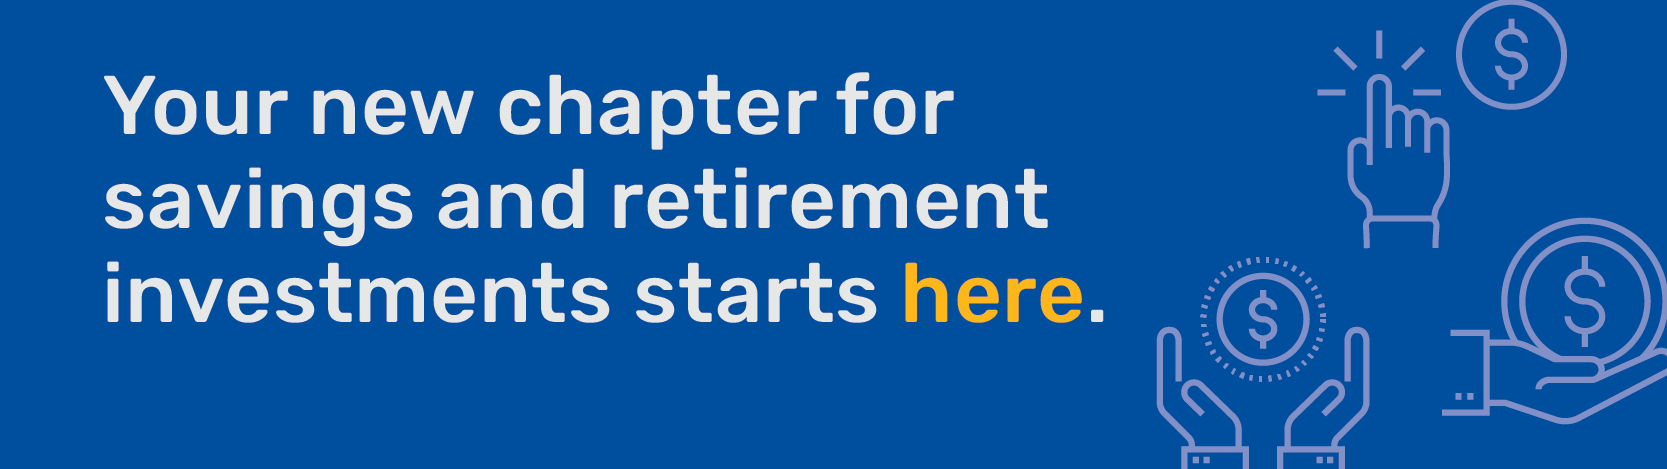 Your new chapter for savings and retirement investments starts here.